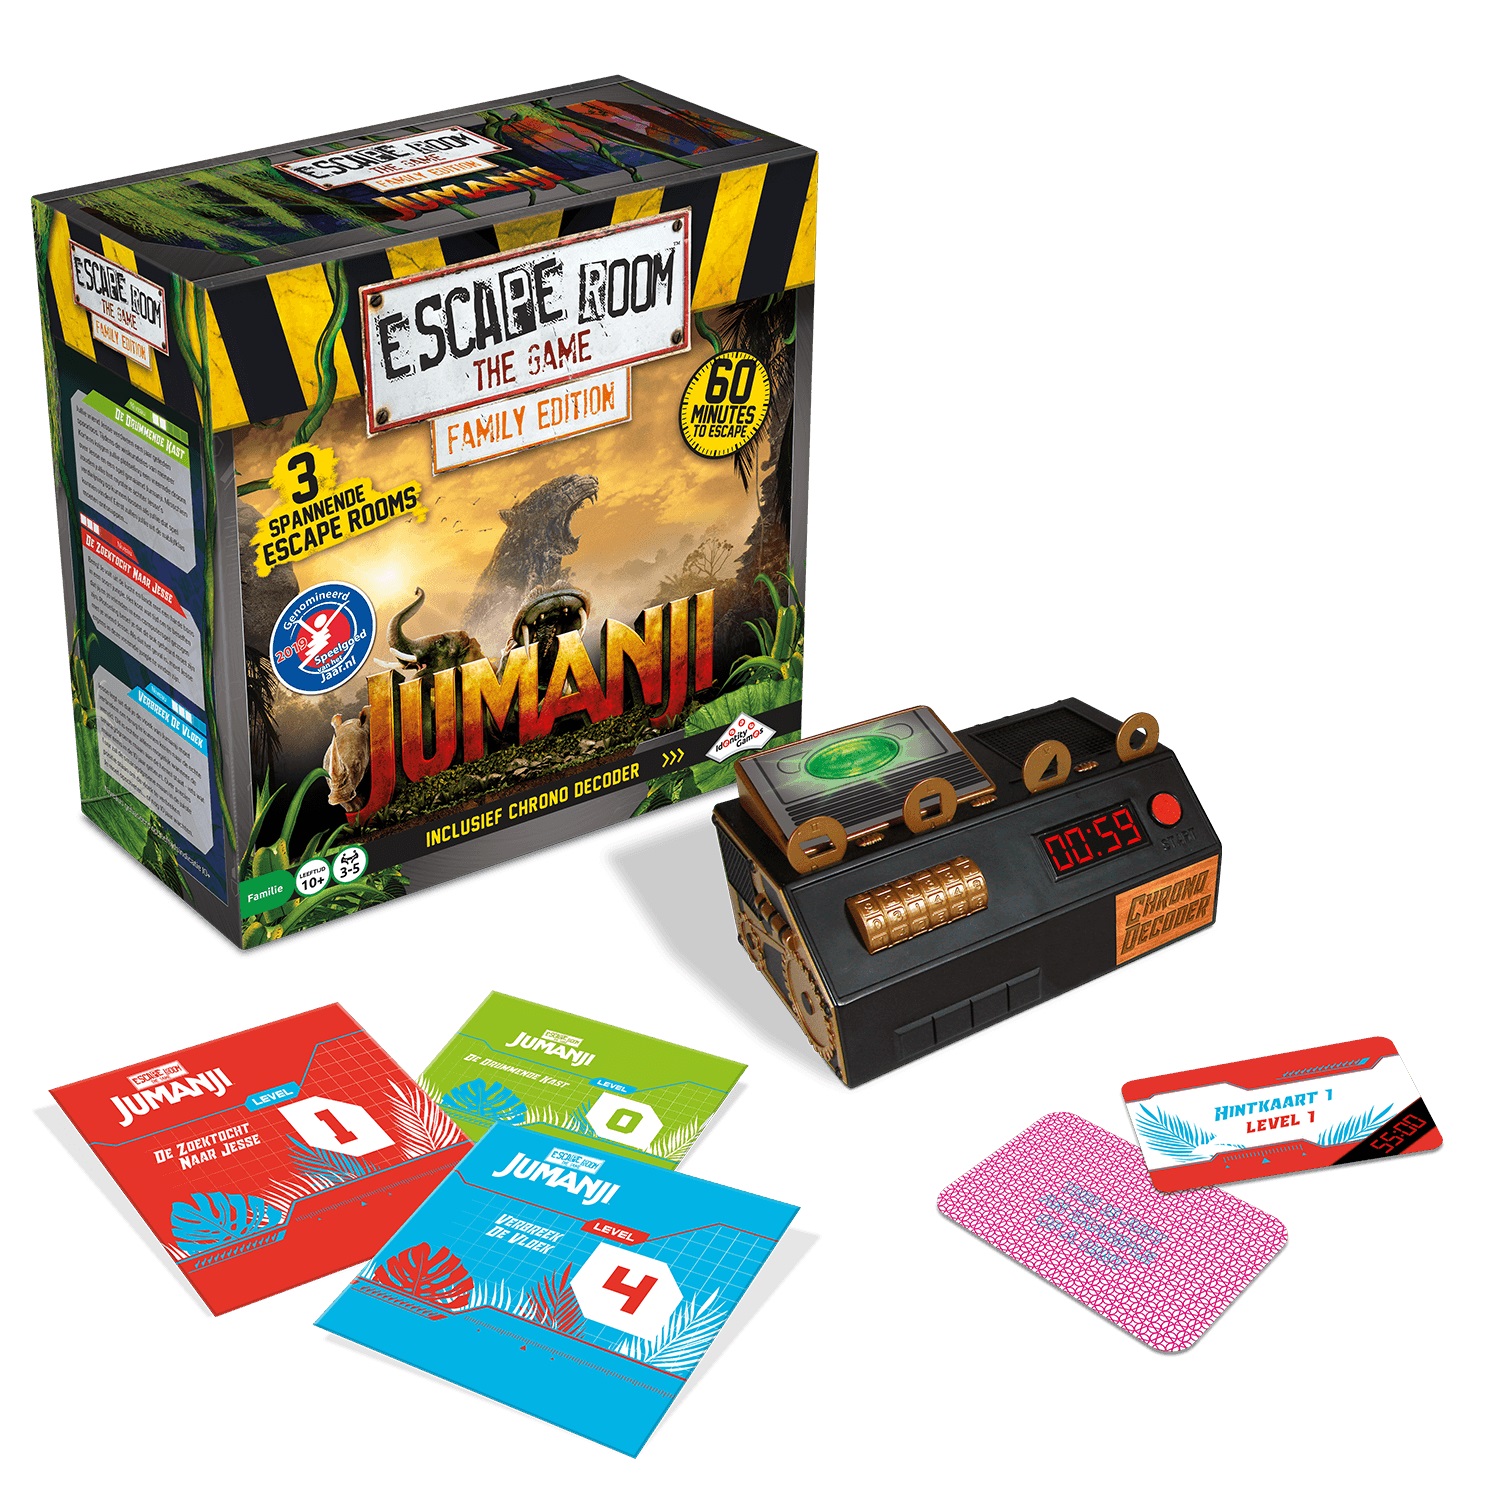 3rd-strike-escape-room-the-game-jumanji-family-edition-board-game-review